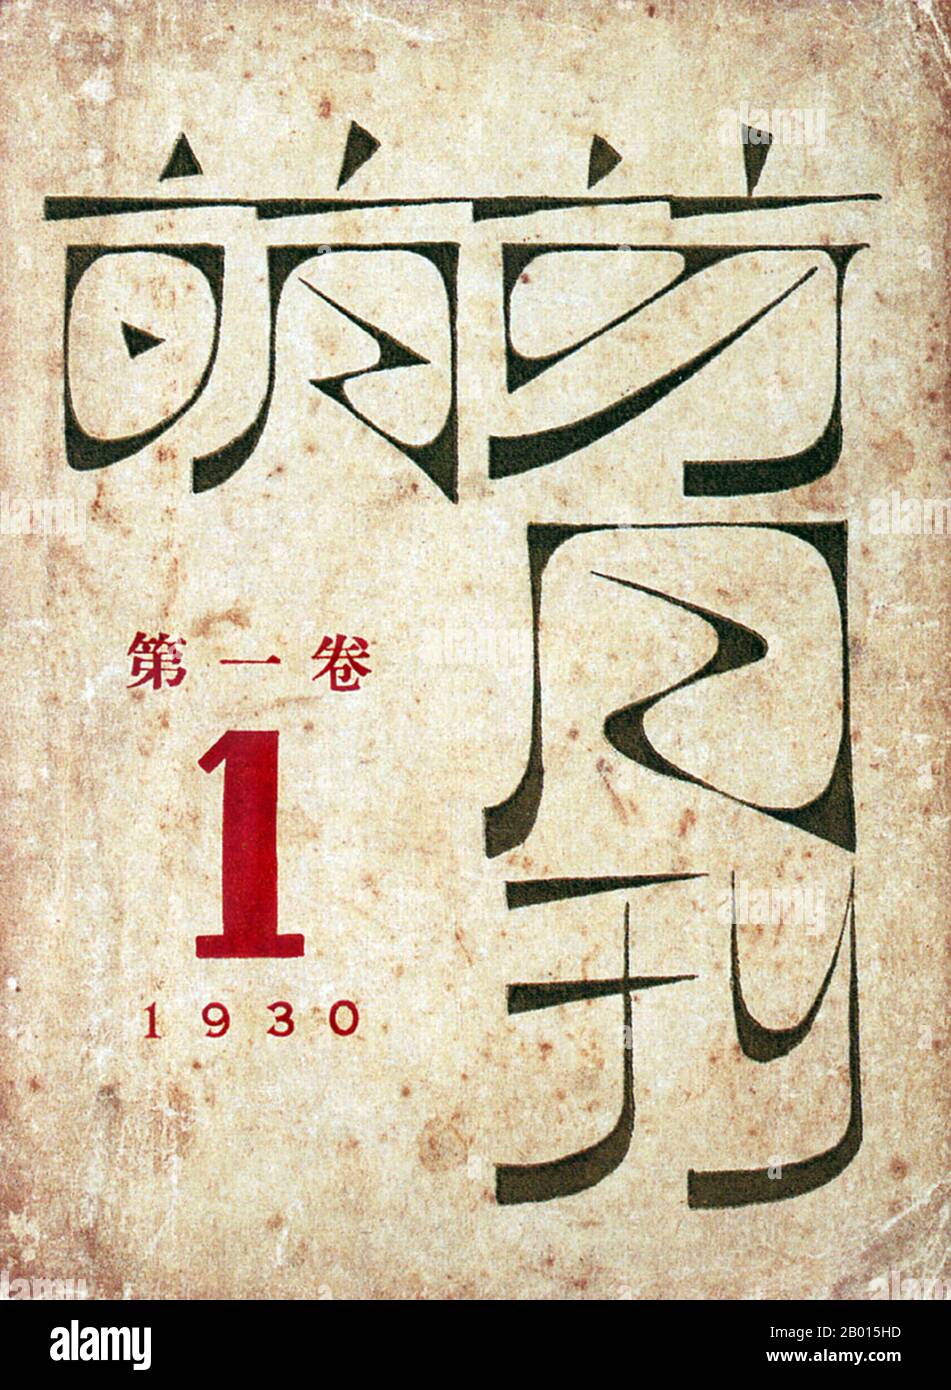 China: Literary revolution - Cover design for Mengya Yuekan ('Sprouts'), 1930.  Cover design for Sprouts (Mengya Yuekan). Edited by Lu Xun, vol. 1, no. 1 (January 1930), published by Guanghua Book Company, Shanghai 1930. Stock Photo